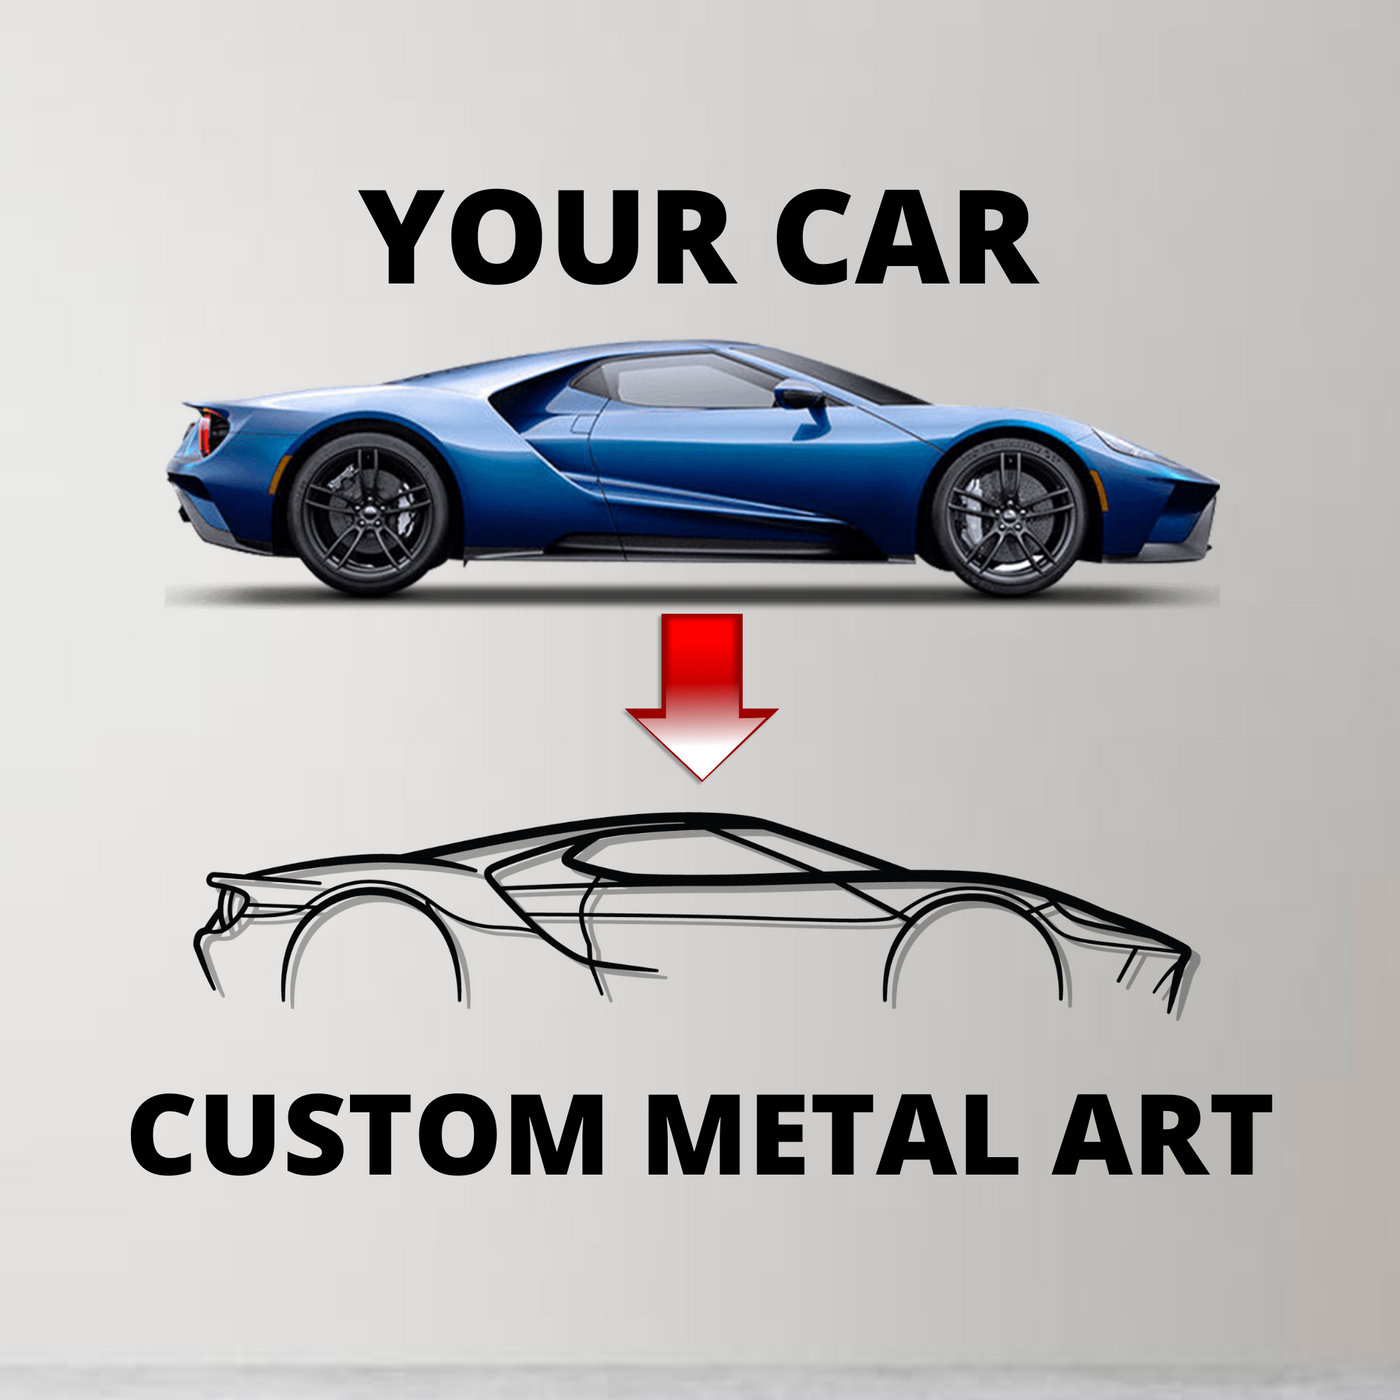 M850i Convertible Detailed Silhouette Metal Wall Art